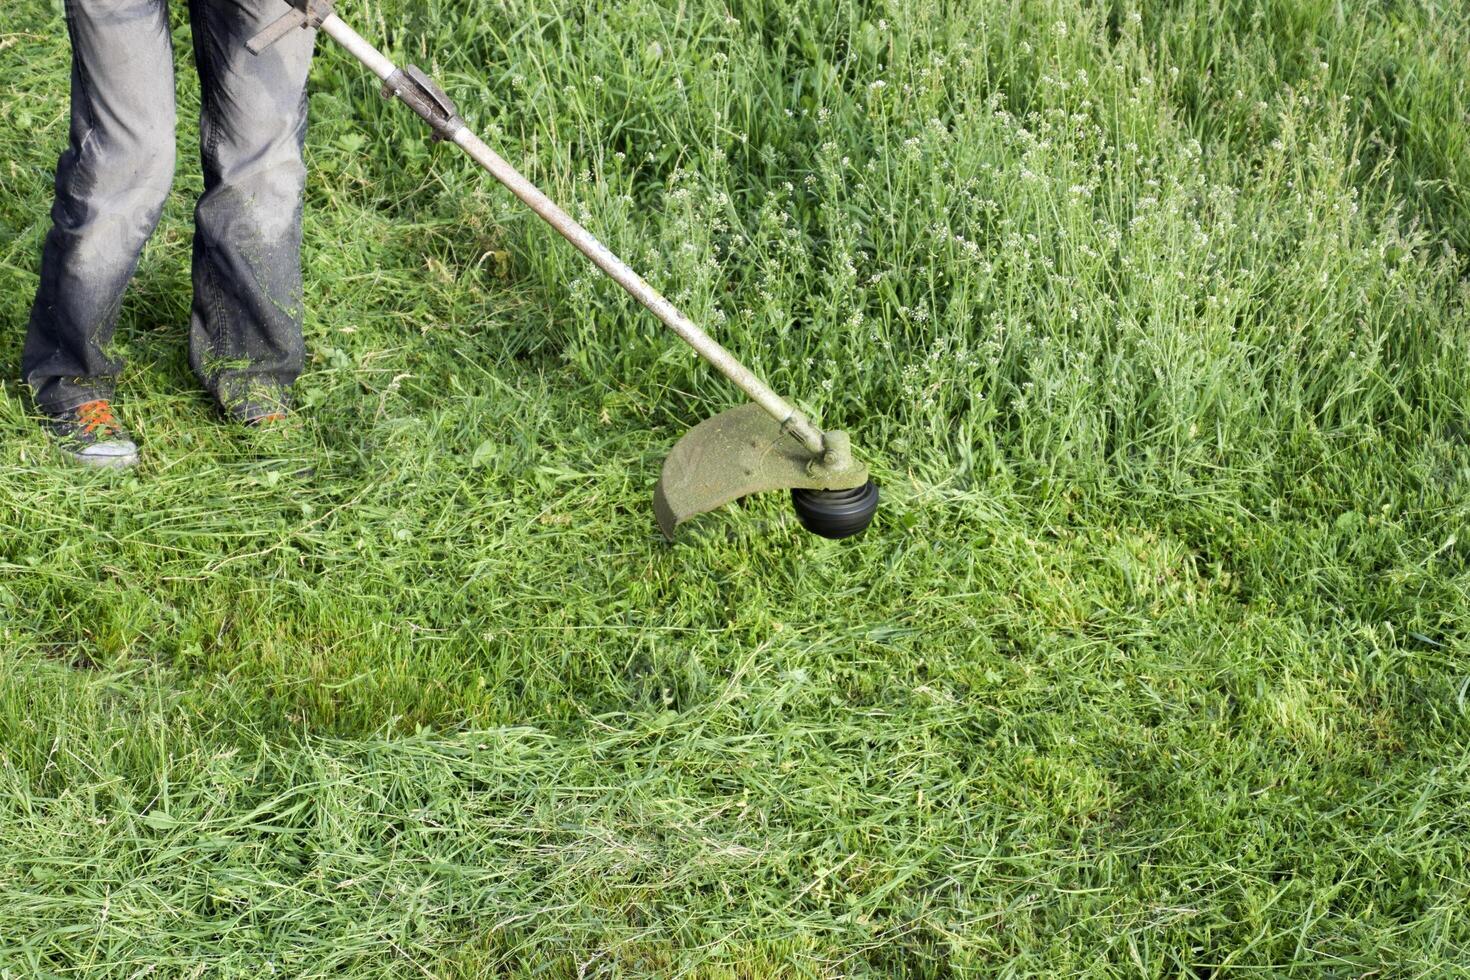 Application trimmers. Mowing green grass using a fishing line trimmer photo